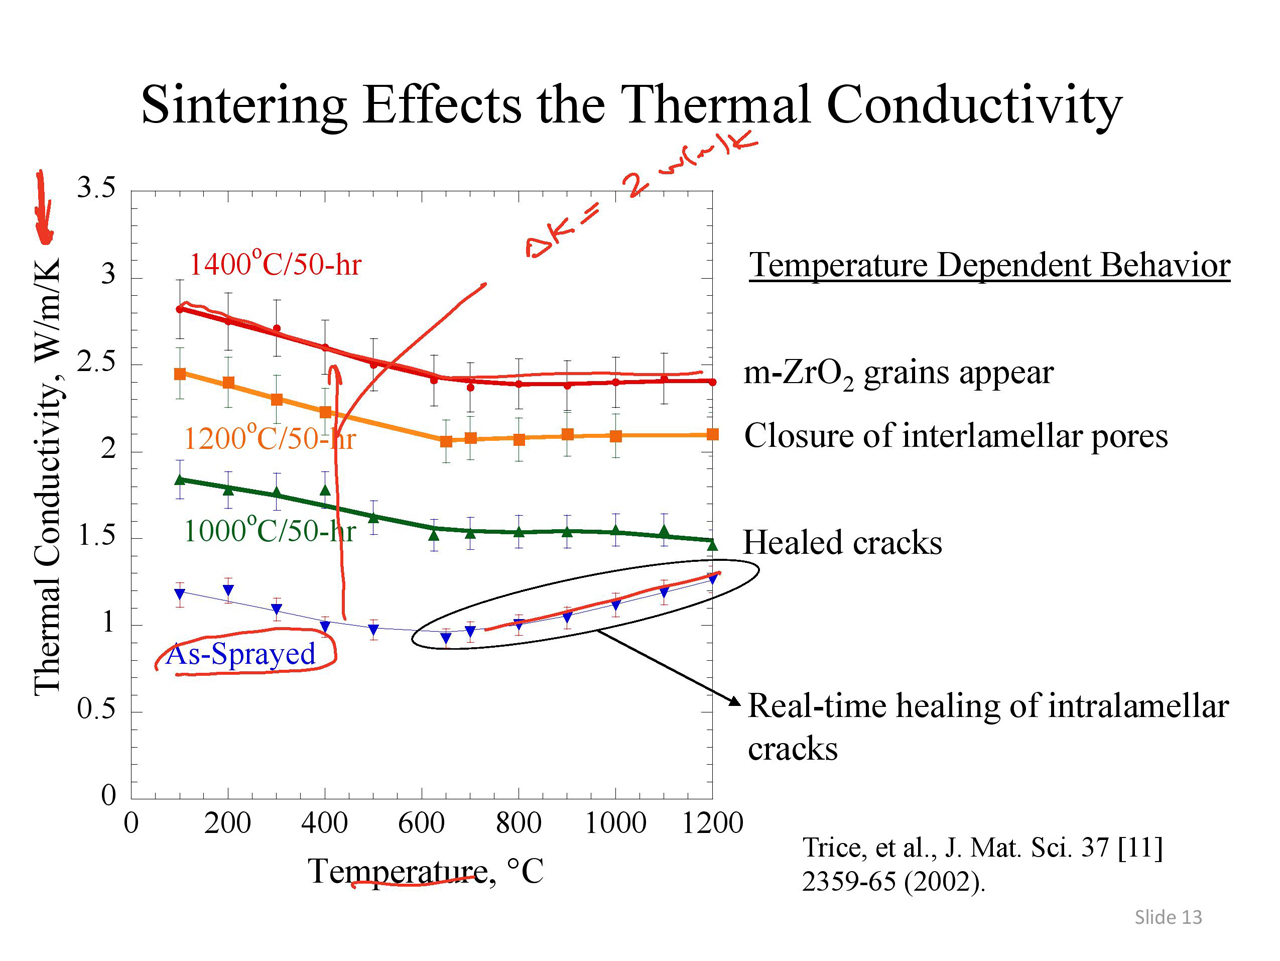 Sintering Effects the Thermal Conductivity